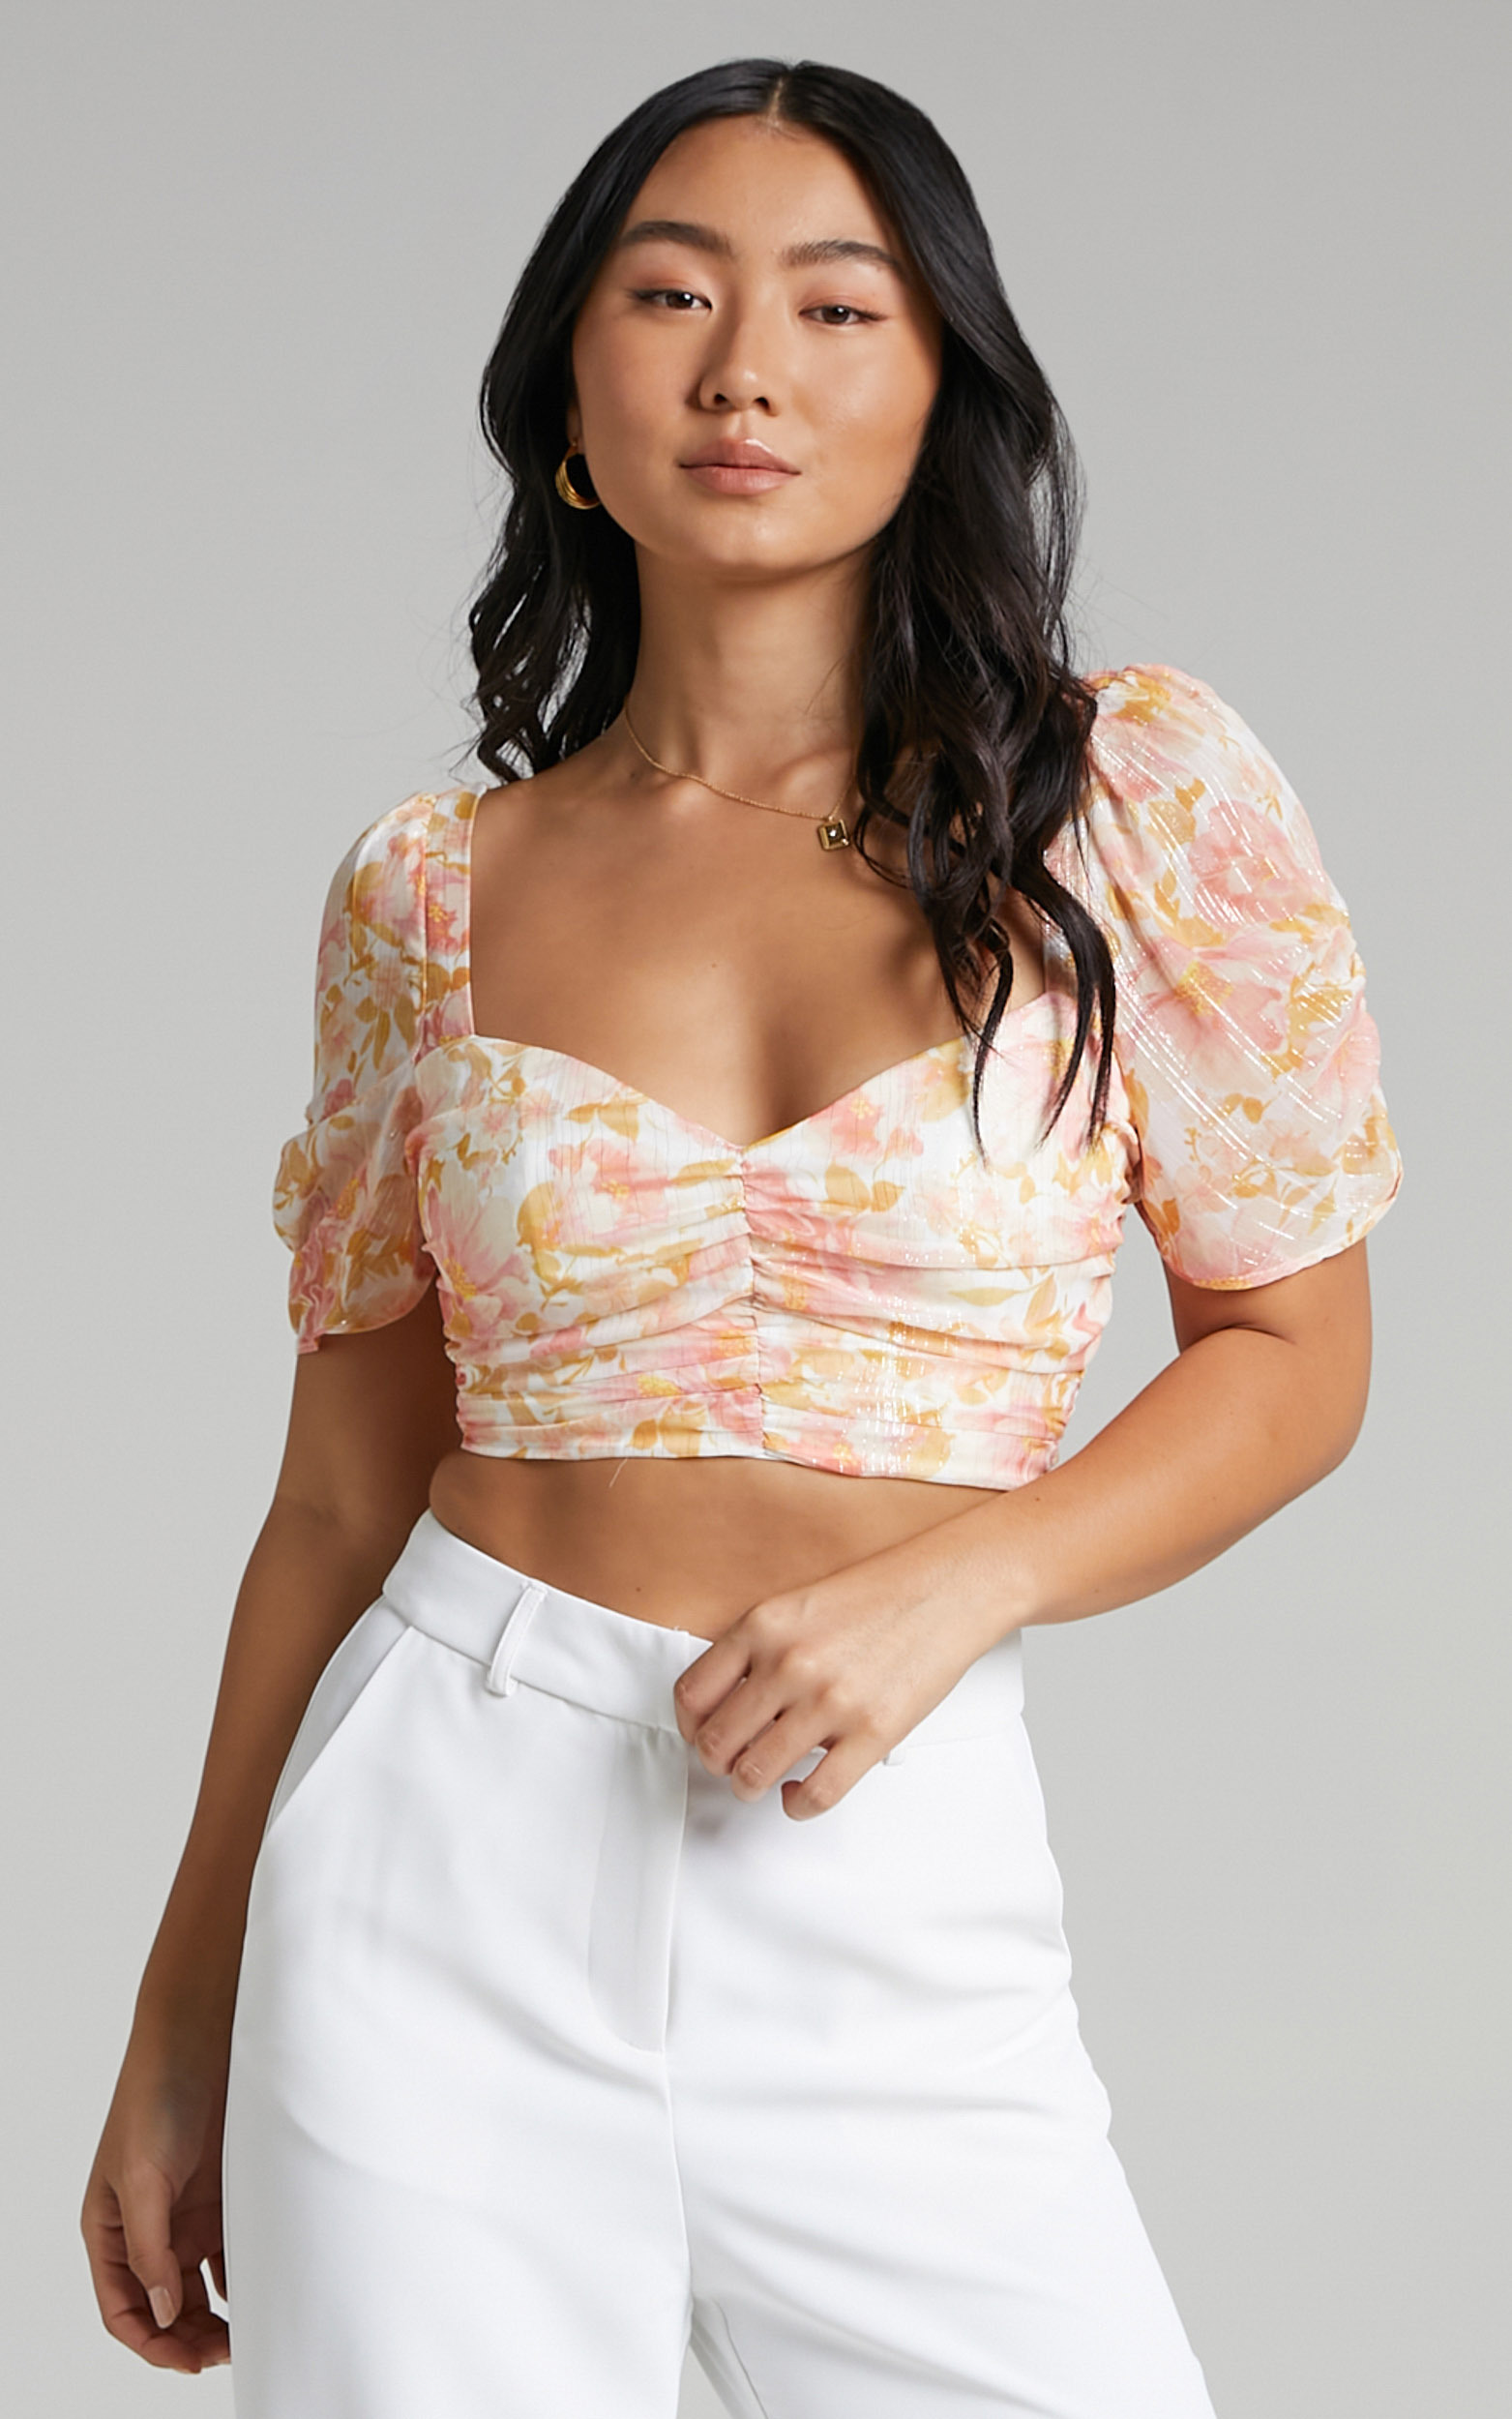 Shenea Sweetheart Puff Sleeve Crop Top in Sunset Floral - 04, MLT1, hi-res image number null